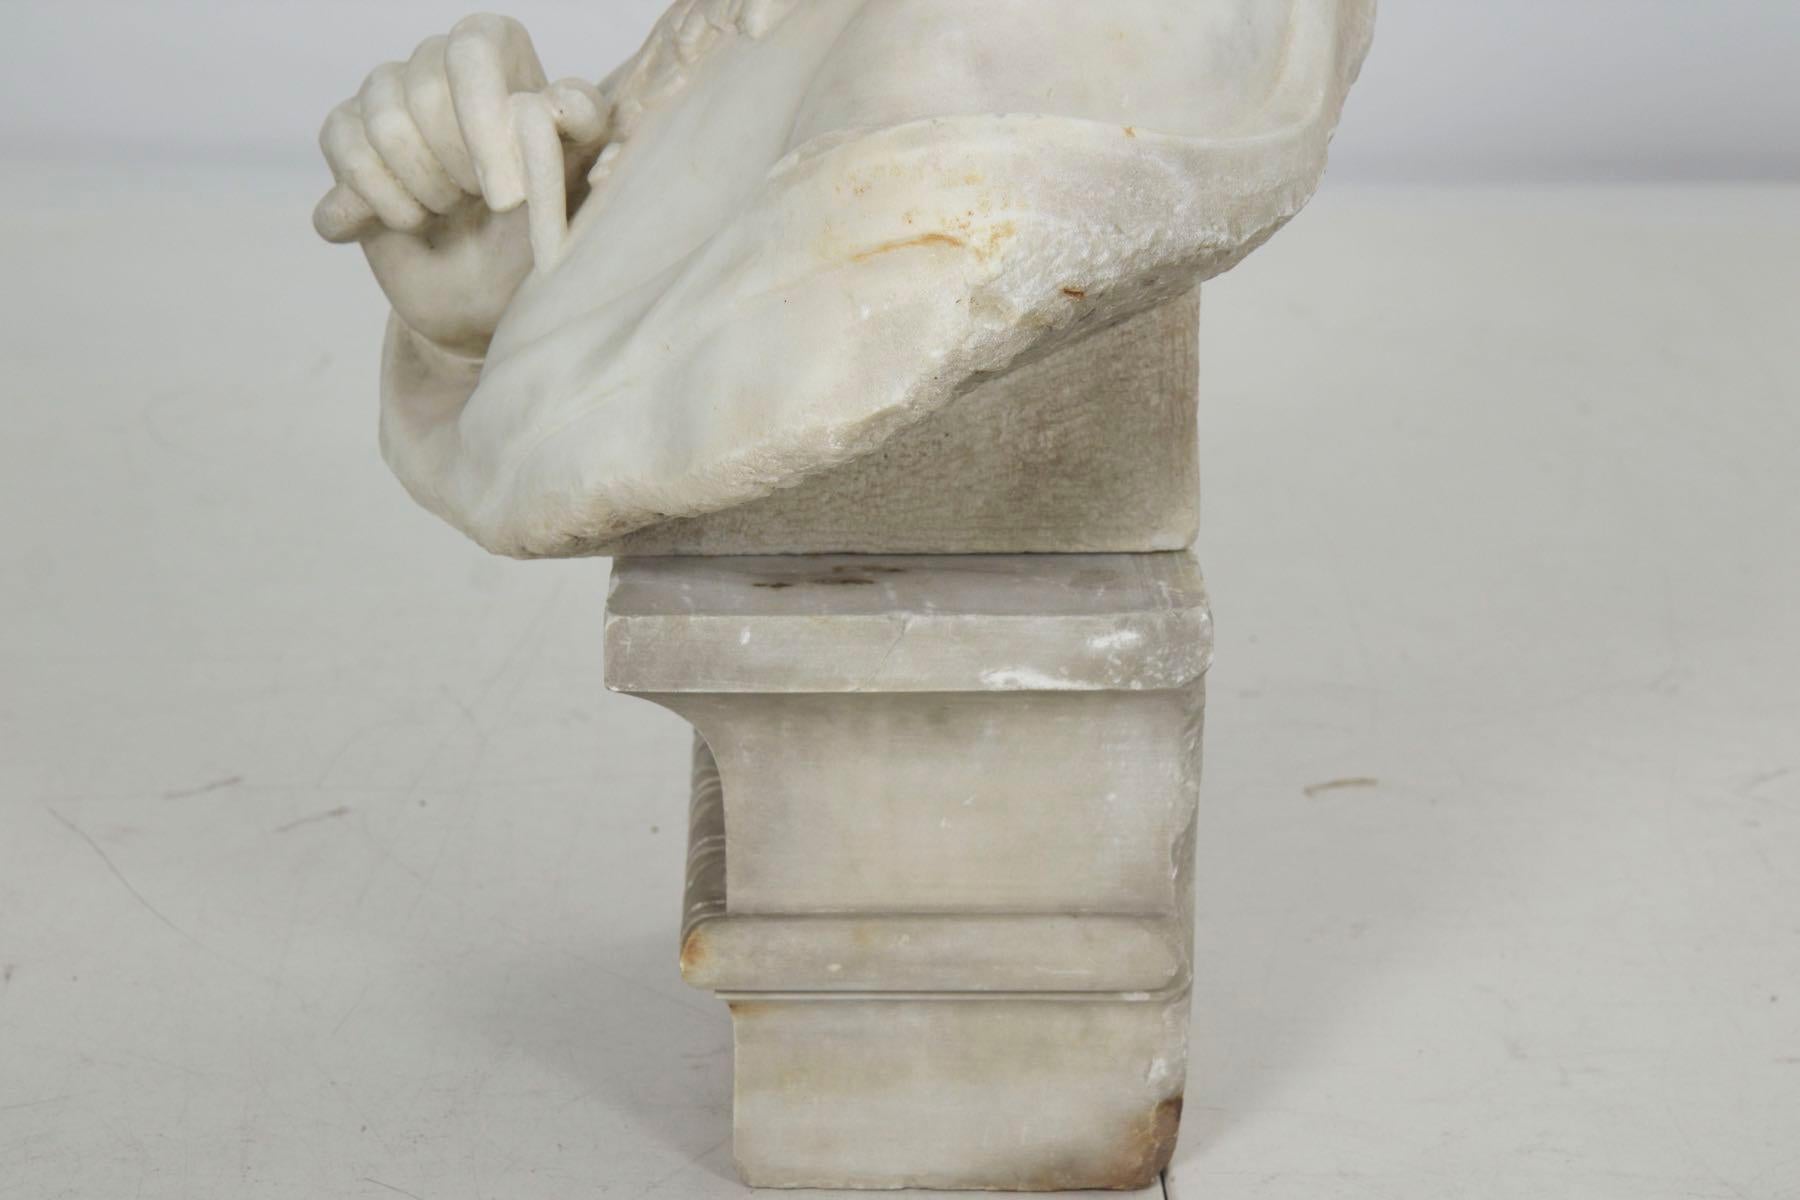 20th Century Italian Marble Bust Antique Sculpture of “Cleopatra” by Aristede Petrilli